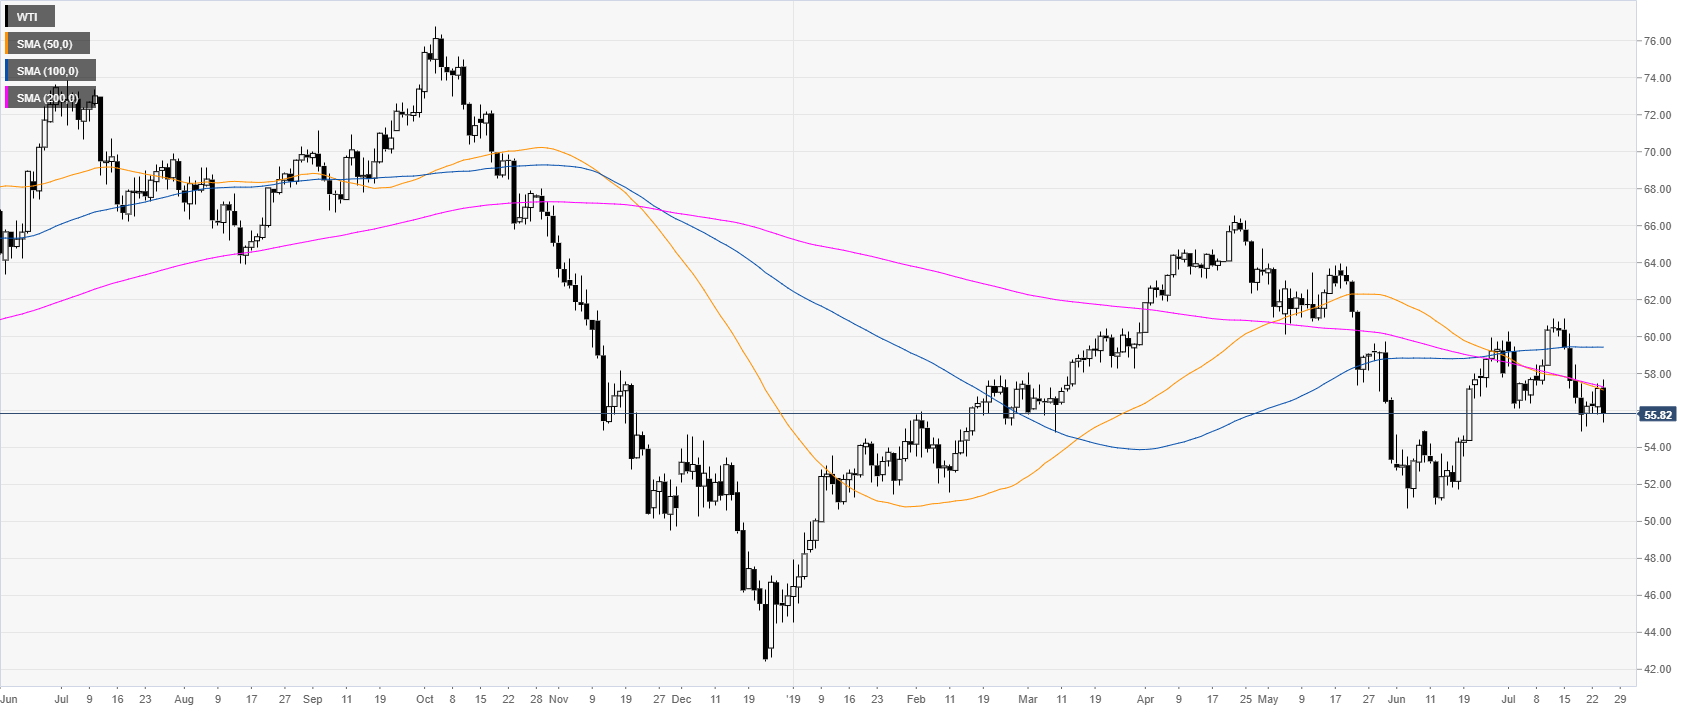 Oil Technical Analysis Wti Drops To 2 Day Lows As Kuwait And Saudi - 